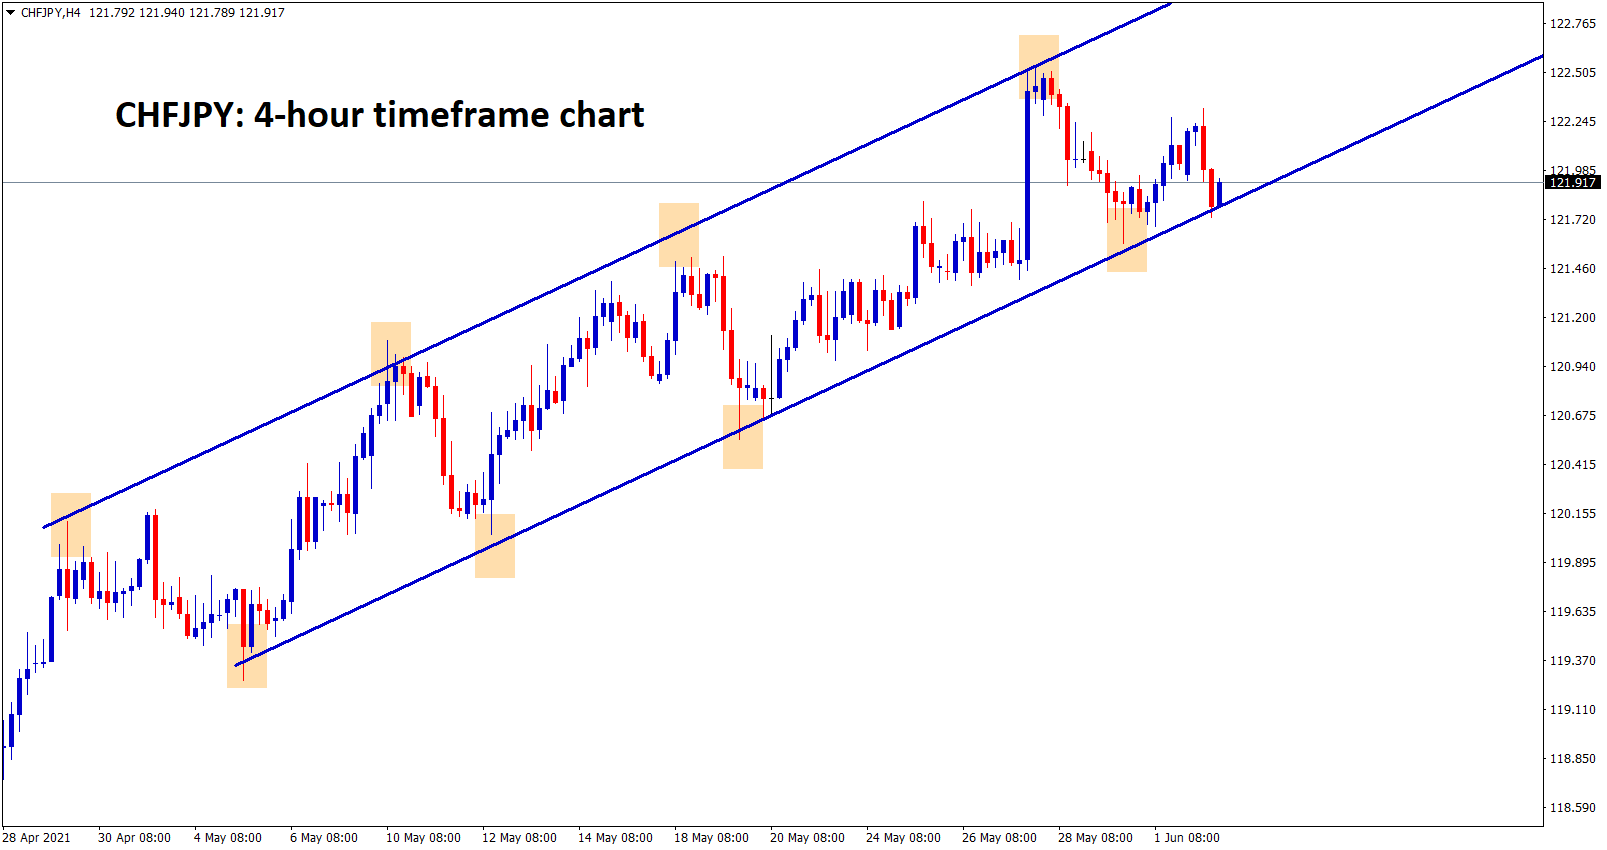 CHFJPY is still moving clearly in an Ascending channel forming higher highs and higher lows